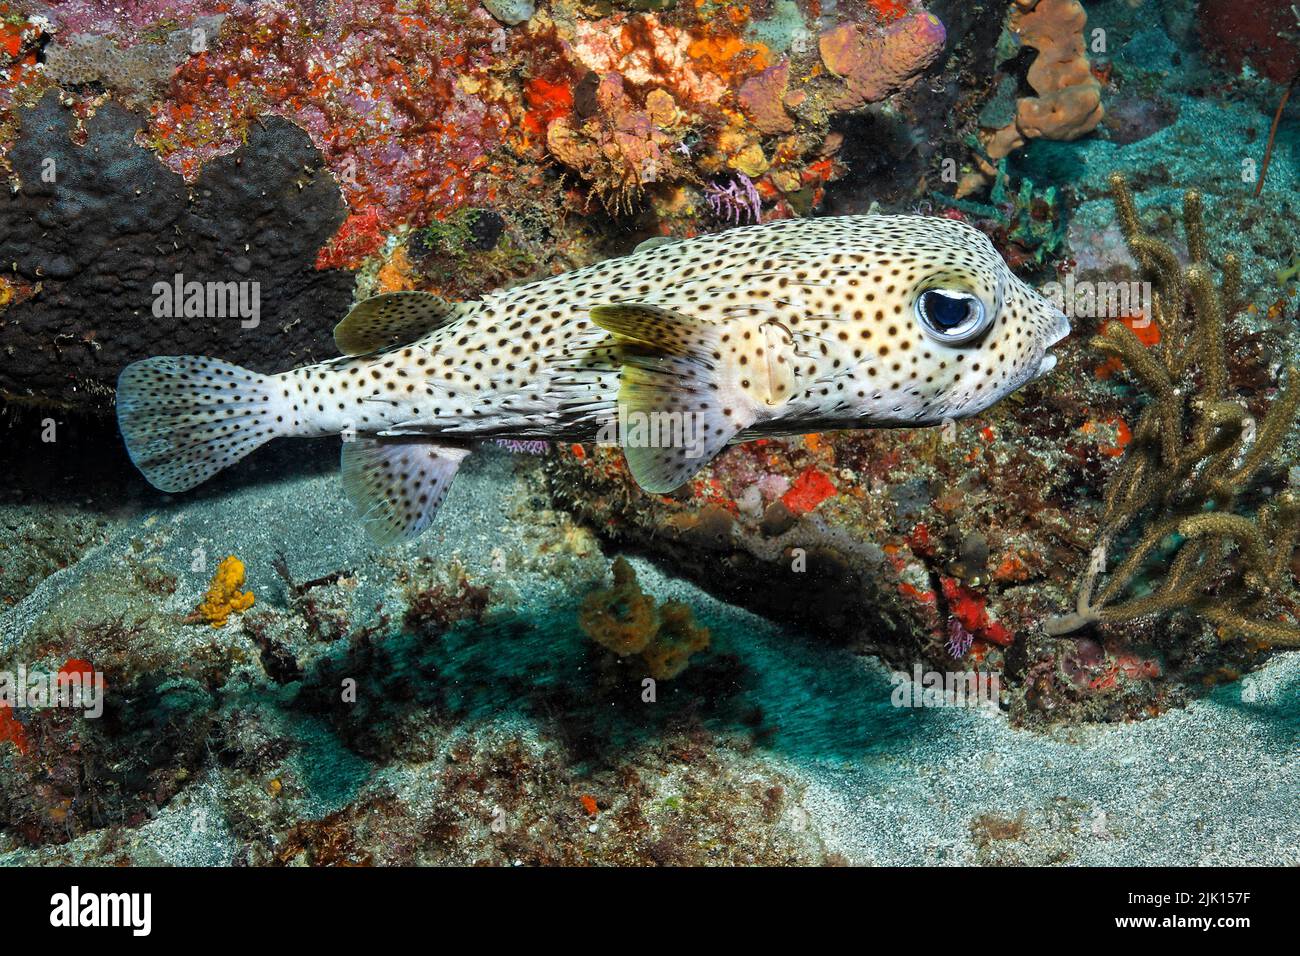 Black spotted porcupinefish (Diodon hystrix), by inflating the body, the spines are erected, Grenada, Caribbean Stock Photo